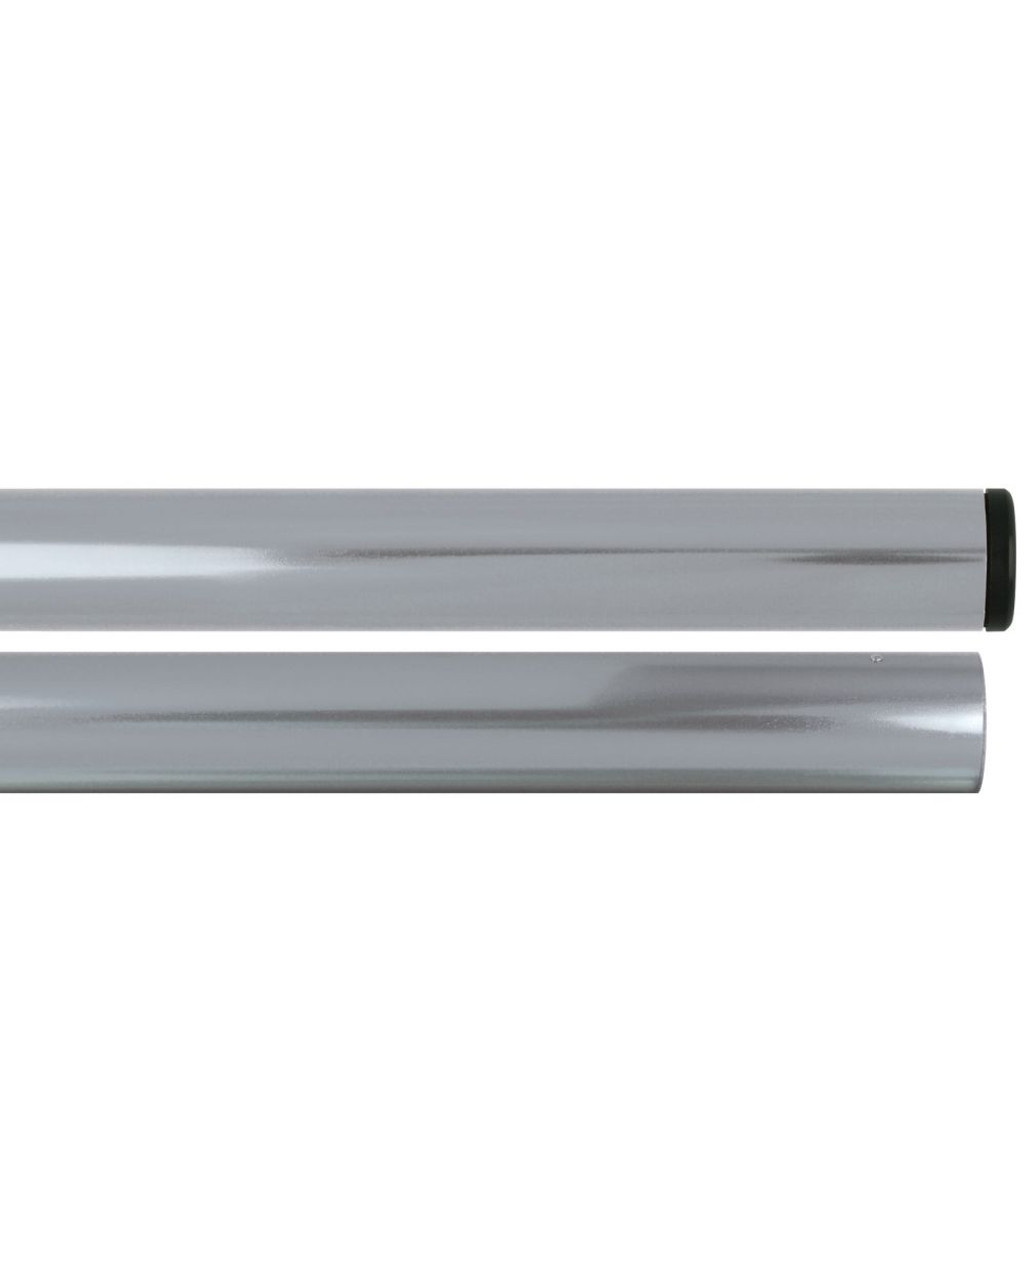 7' x 1" Aluminum Marching Band Pole, Silver, 2 Section MP-5, 050335